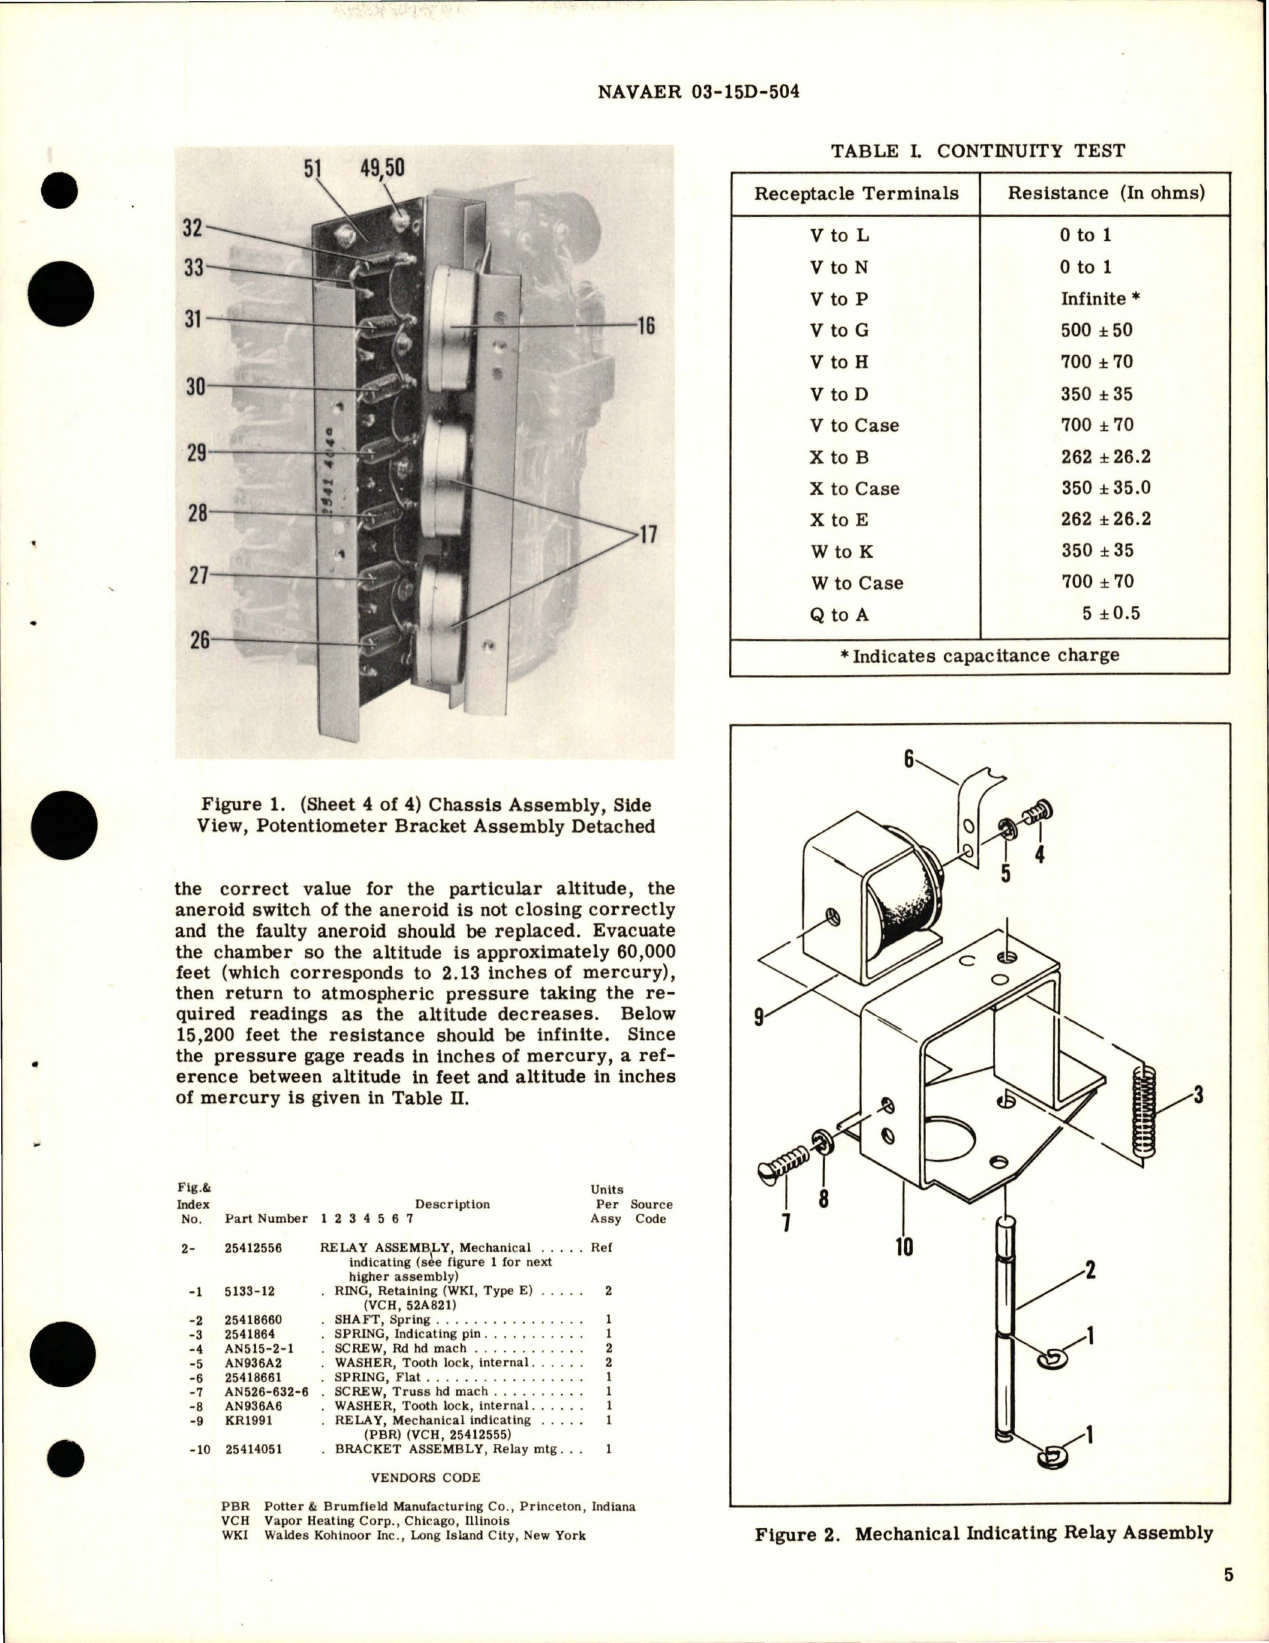 Sample page 5 from AirCorps Library document: Overhaul Instructions with Parts for Aircraft Temperature System Control Box - 53C236-1